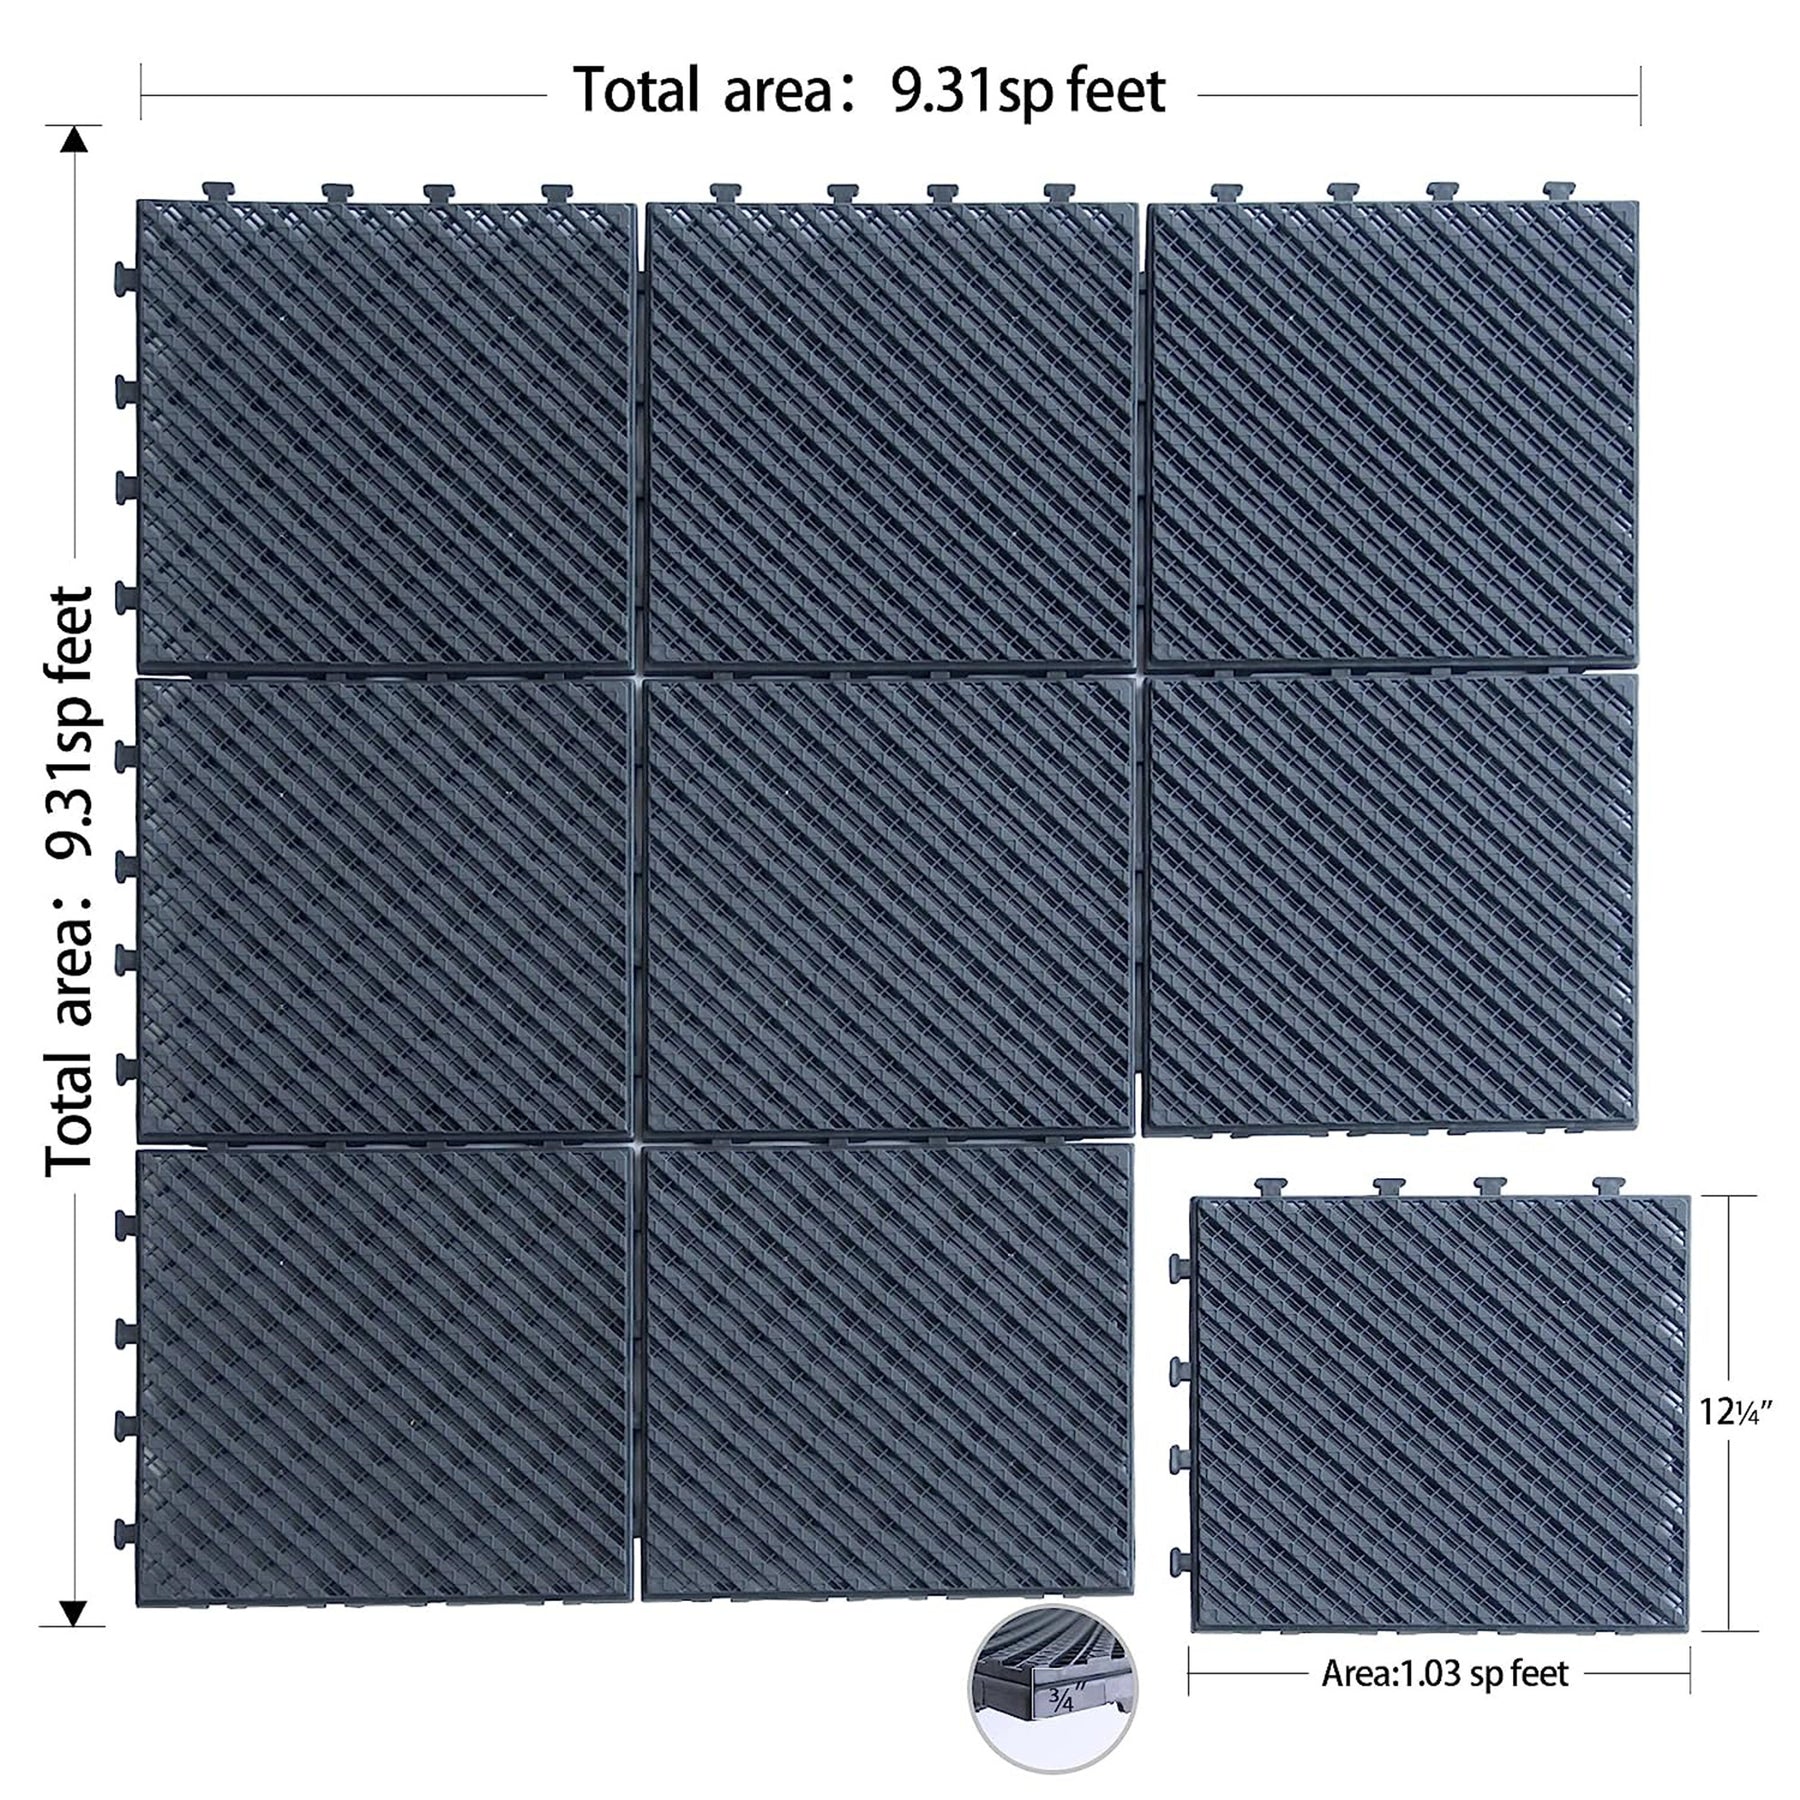 Patio Interlocking Deck Tiles, 12"x12" Square Composite Decking Tiles, Four Slat Plastic Outdoor Flooring Tile All Weather for Balcony Porch Backyard, (Dark Gray, Pack of 27) - Tonkn